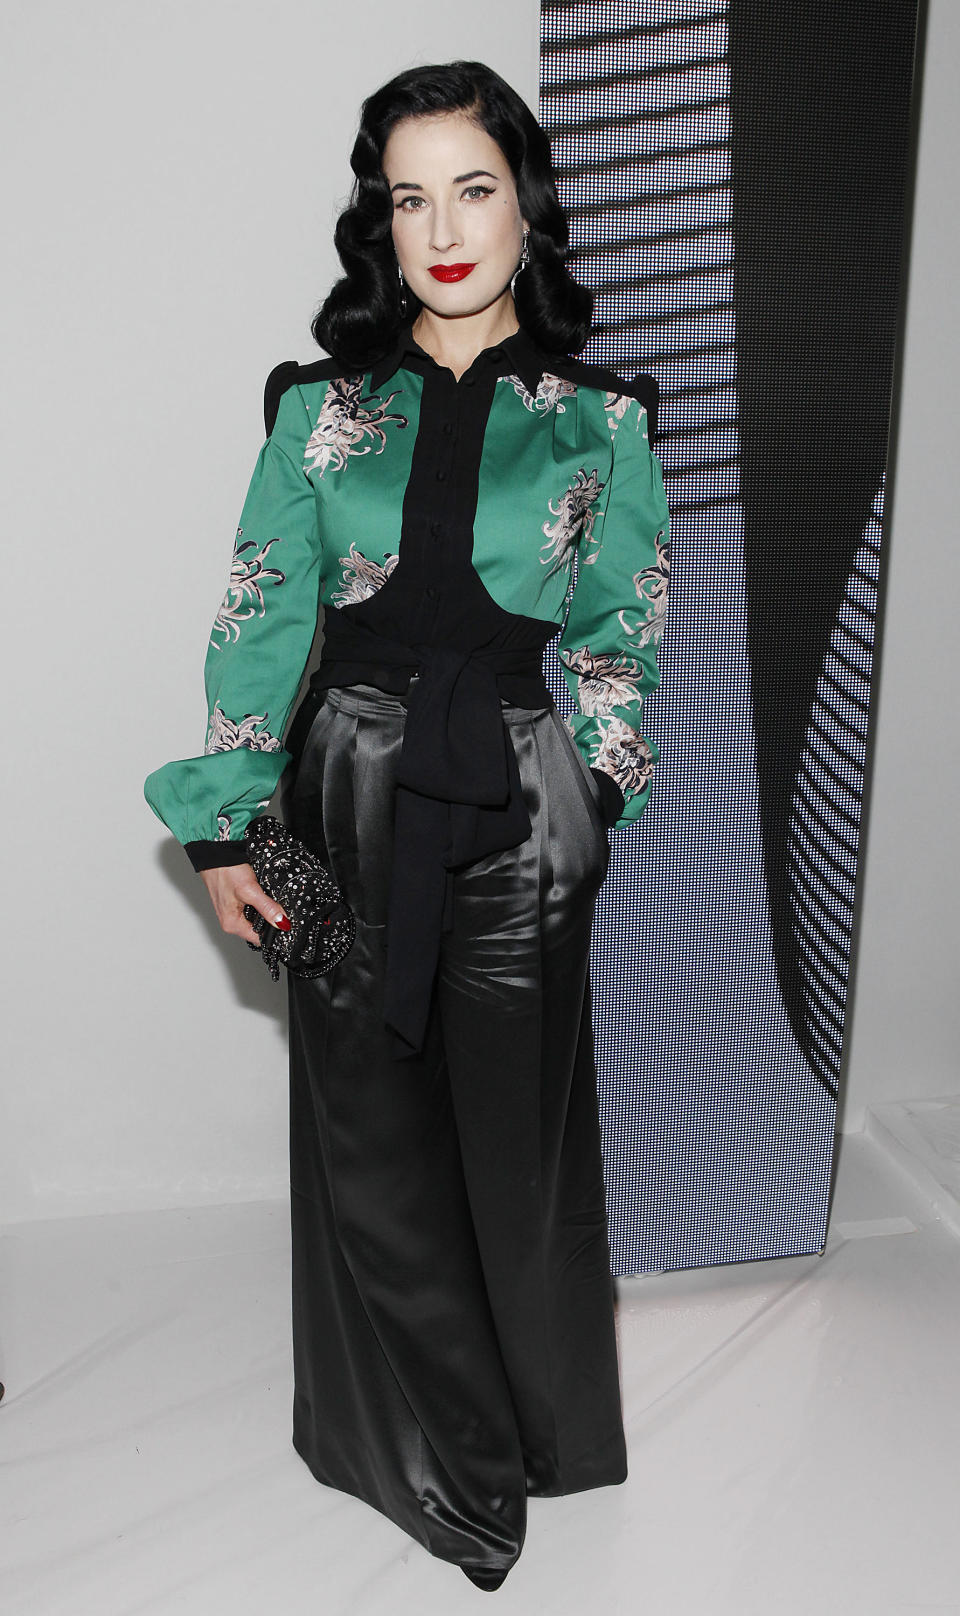 Dita Von Teese attends the Carolina Herrera Spring 2014 collection on Monday, Sept. 9, 2013, during Mercedes-Benz Fashion Week in New York. (Photo by Amy Sussman/Invision/AP)